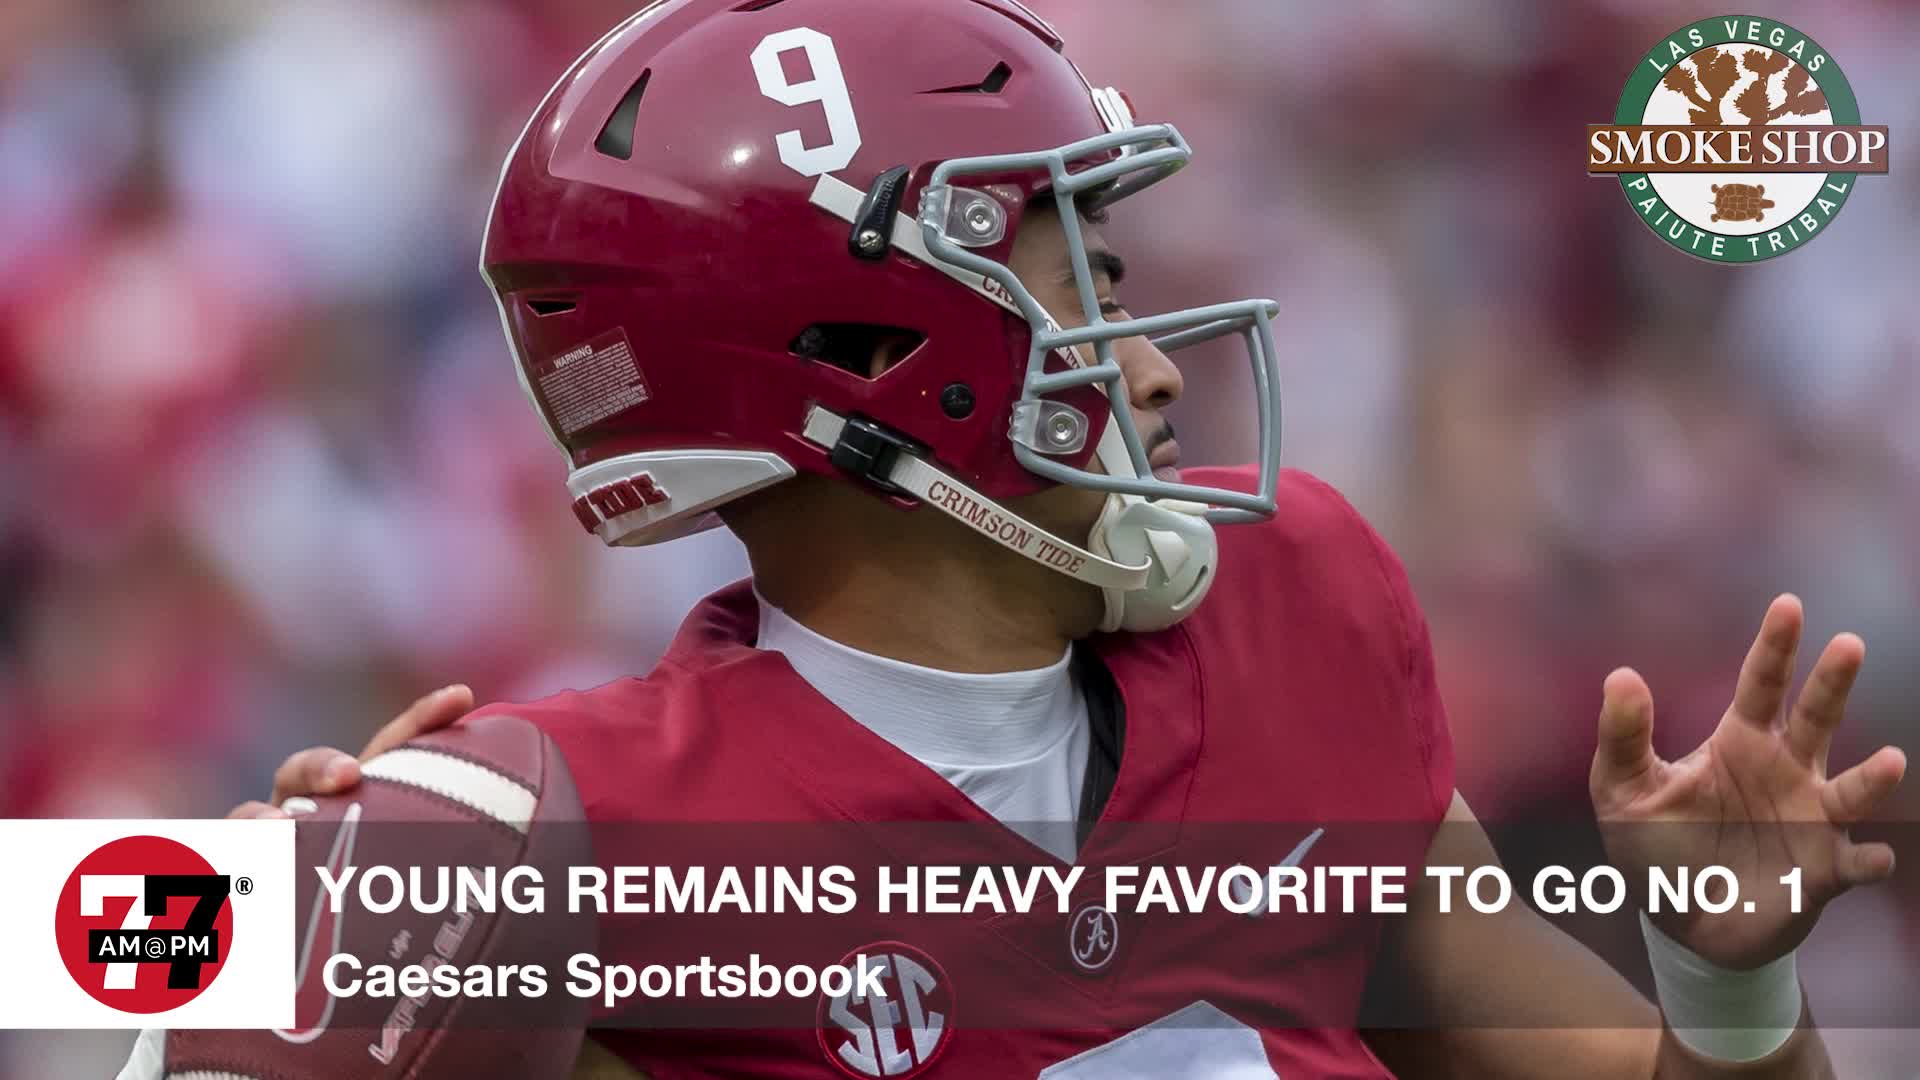 Young remains heavy favorite to go number one